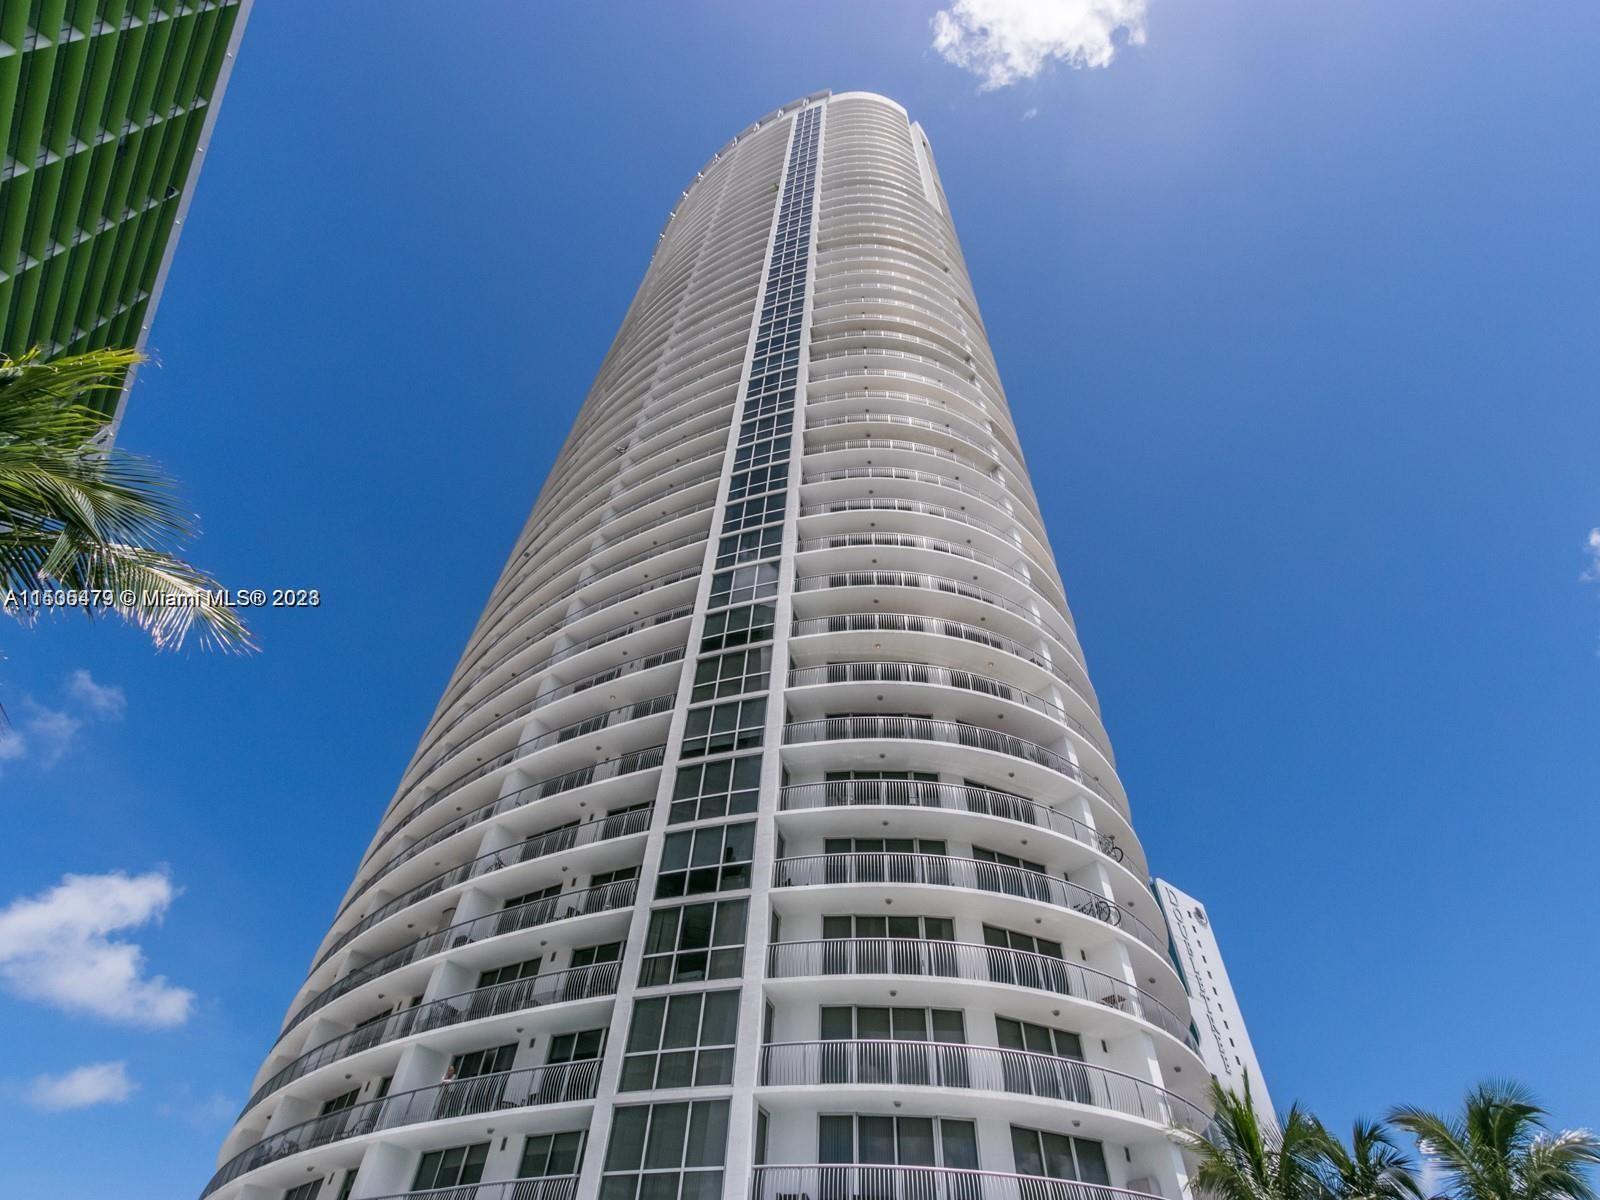 Beautiful & bright 1 bed/1bath apartment on the 40th floor at Opera tower. Amazing 180-degree views looking at the bay, ocean and Miami skyline. Tile flooring, spacious bathroom, walk-in closet and large balcony with bay views. Building has great amenities including gym, pool, market and 1 assigned covered parking space.